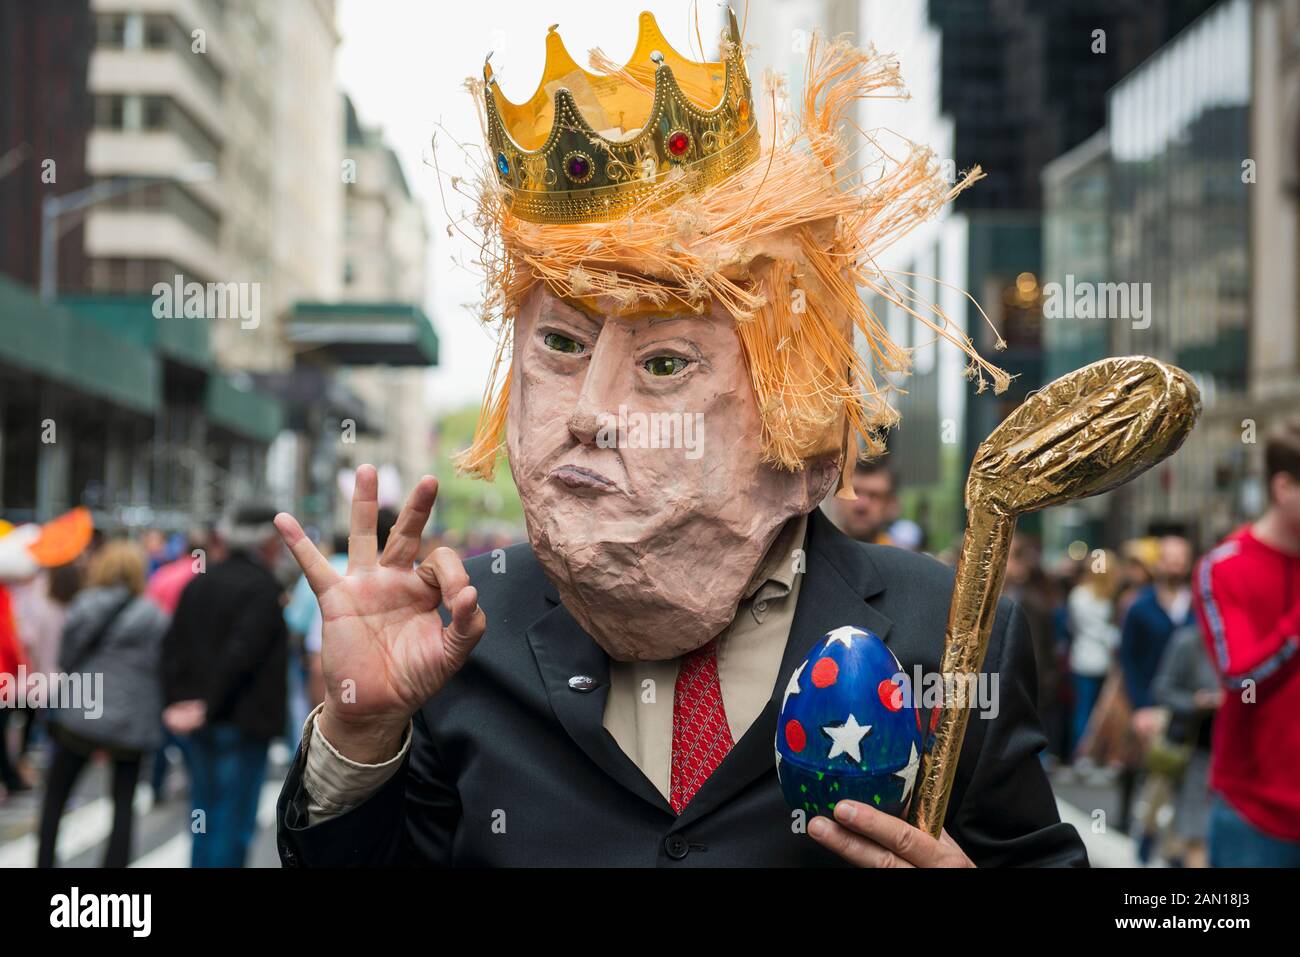 A person wearing a Donald Trump mask during New York’s Easter parade in 2019. Stock Photo